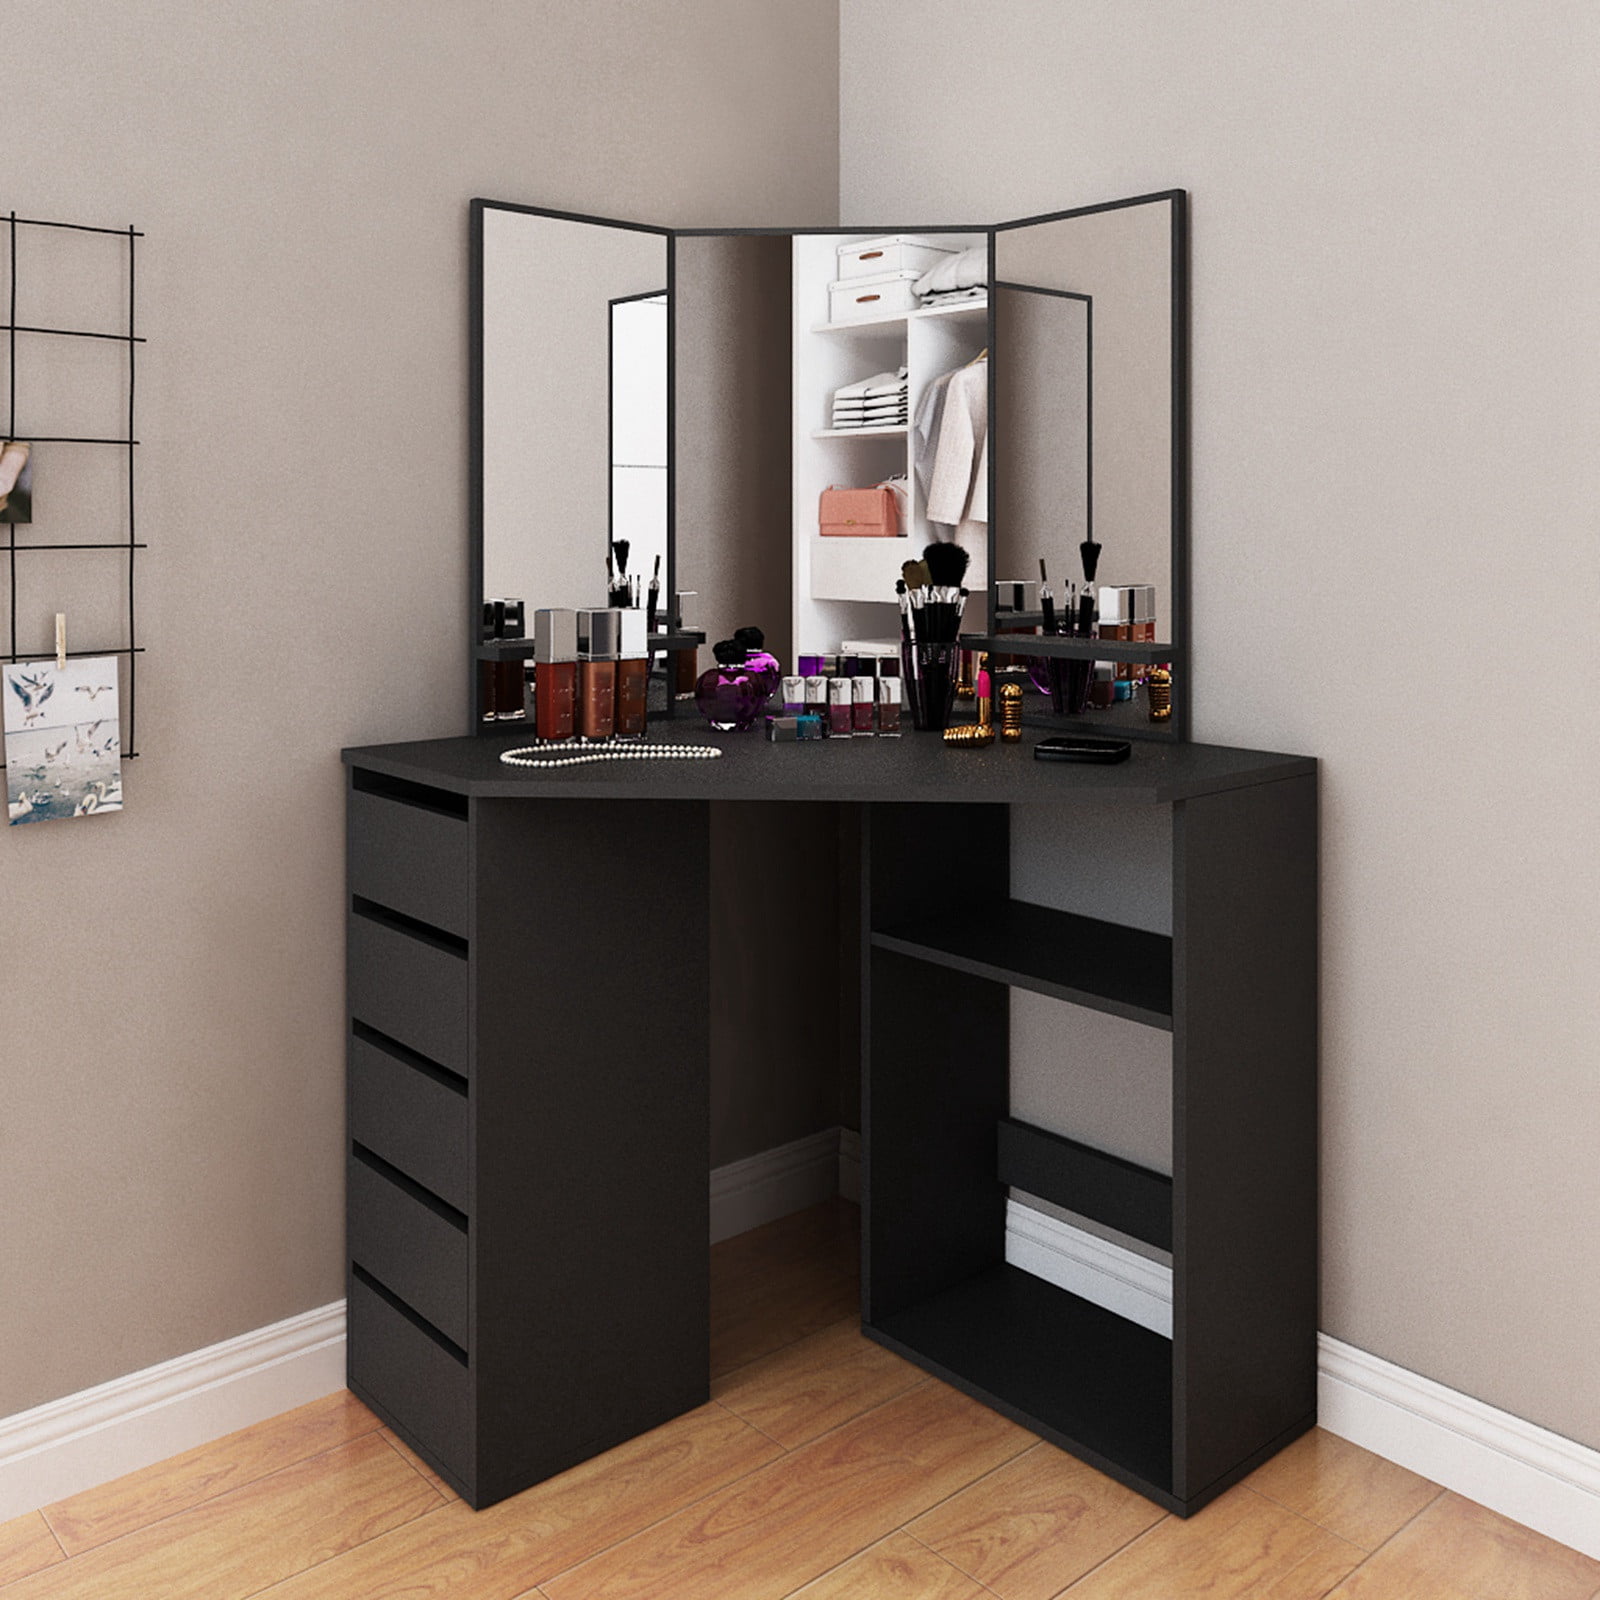 Details about   HOT Dressing Table Mirror Stool Mirror Jewellery Cabinet Makeup Storage Desk 